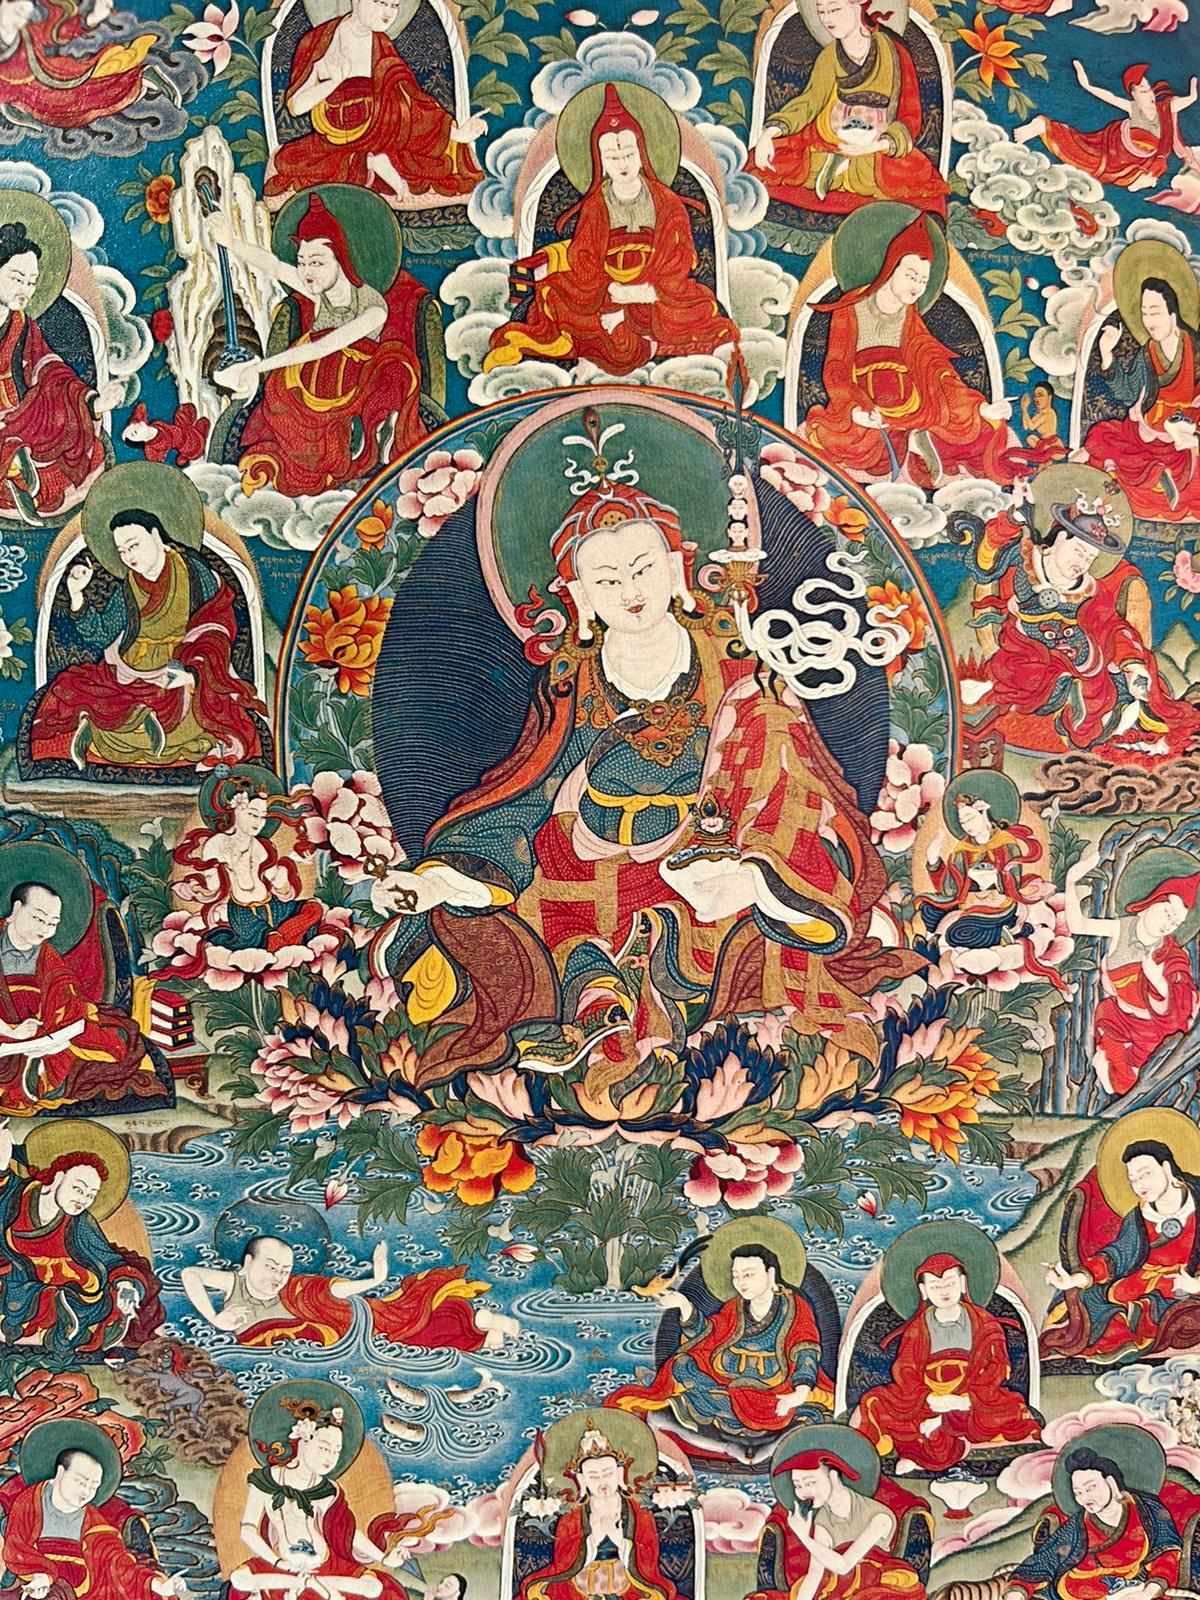 Mother of Knowledge: Enlightenment of Yeshe Tsogyal